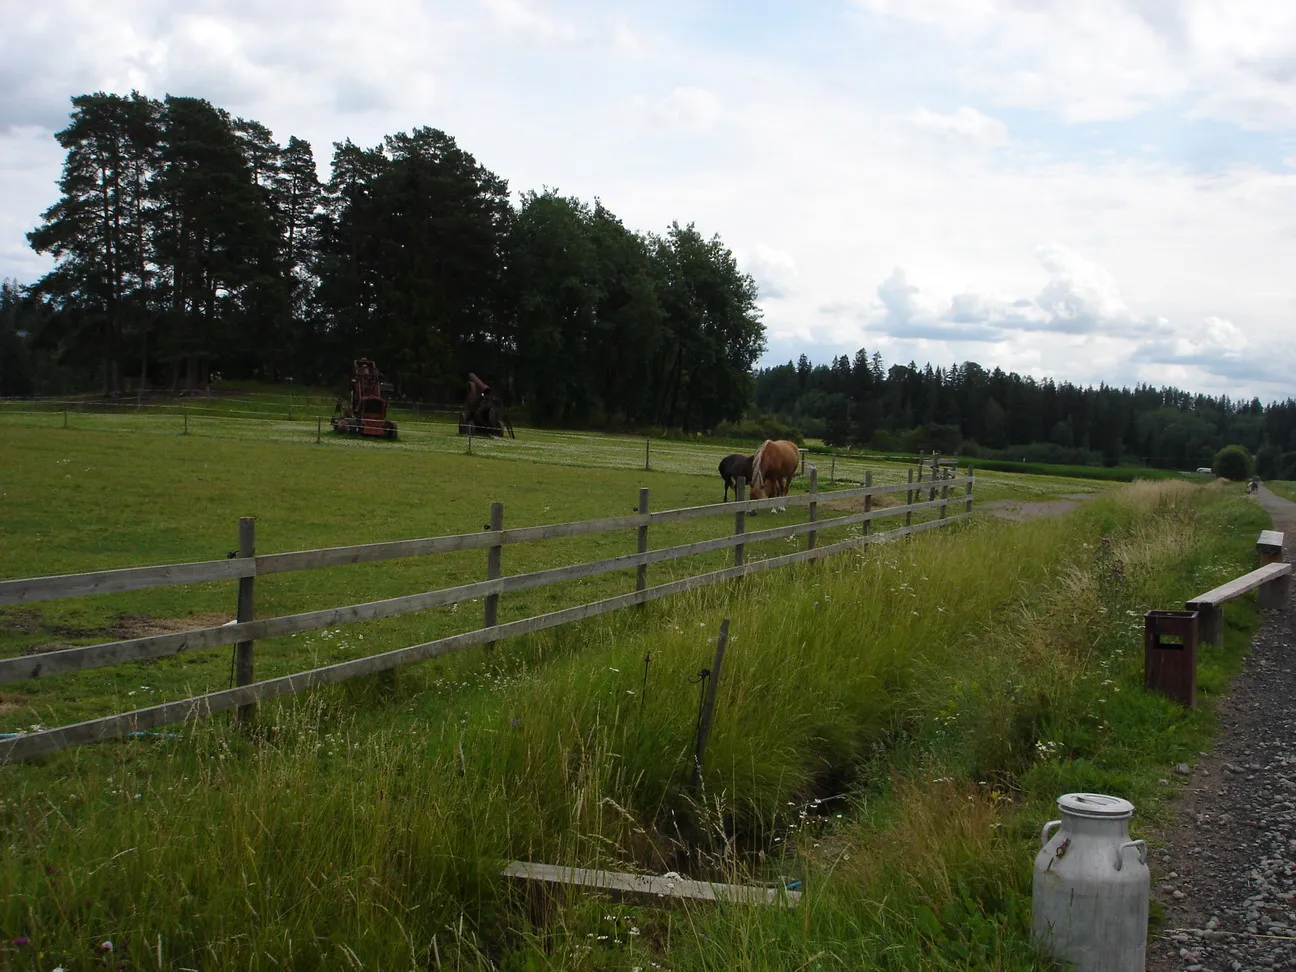 Photo showing: A view from Elonkierto - The Agricultural Exhibition Park of MTT Agrifood Research Finland in Jokioinen Manor in Jokioinen, Finland.